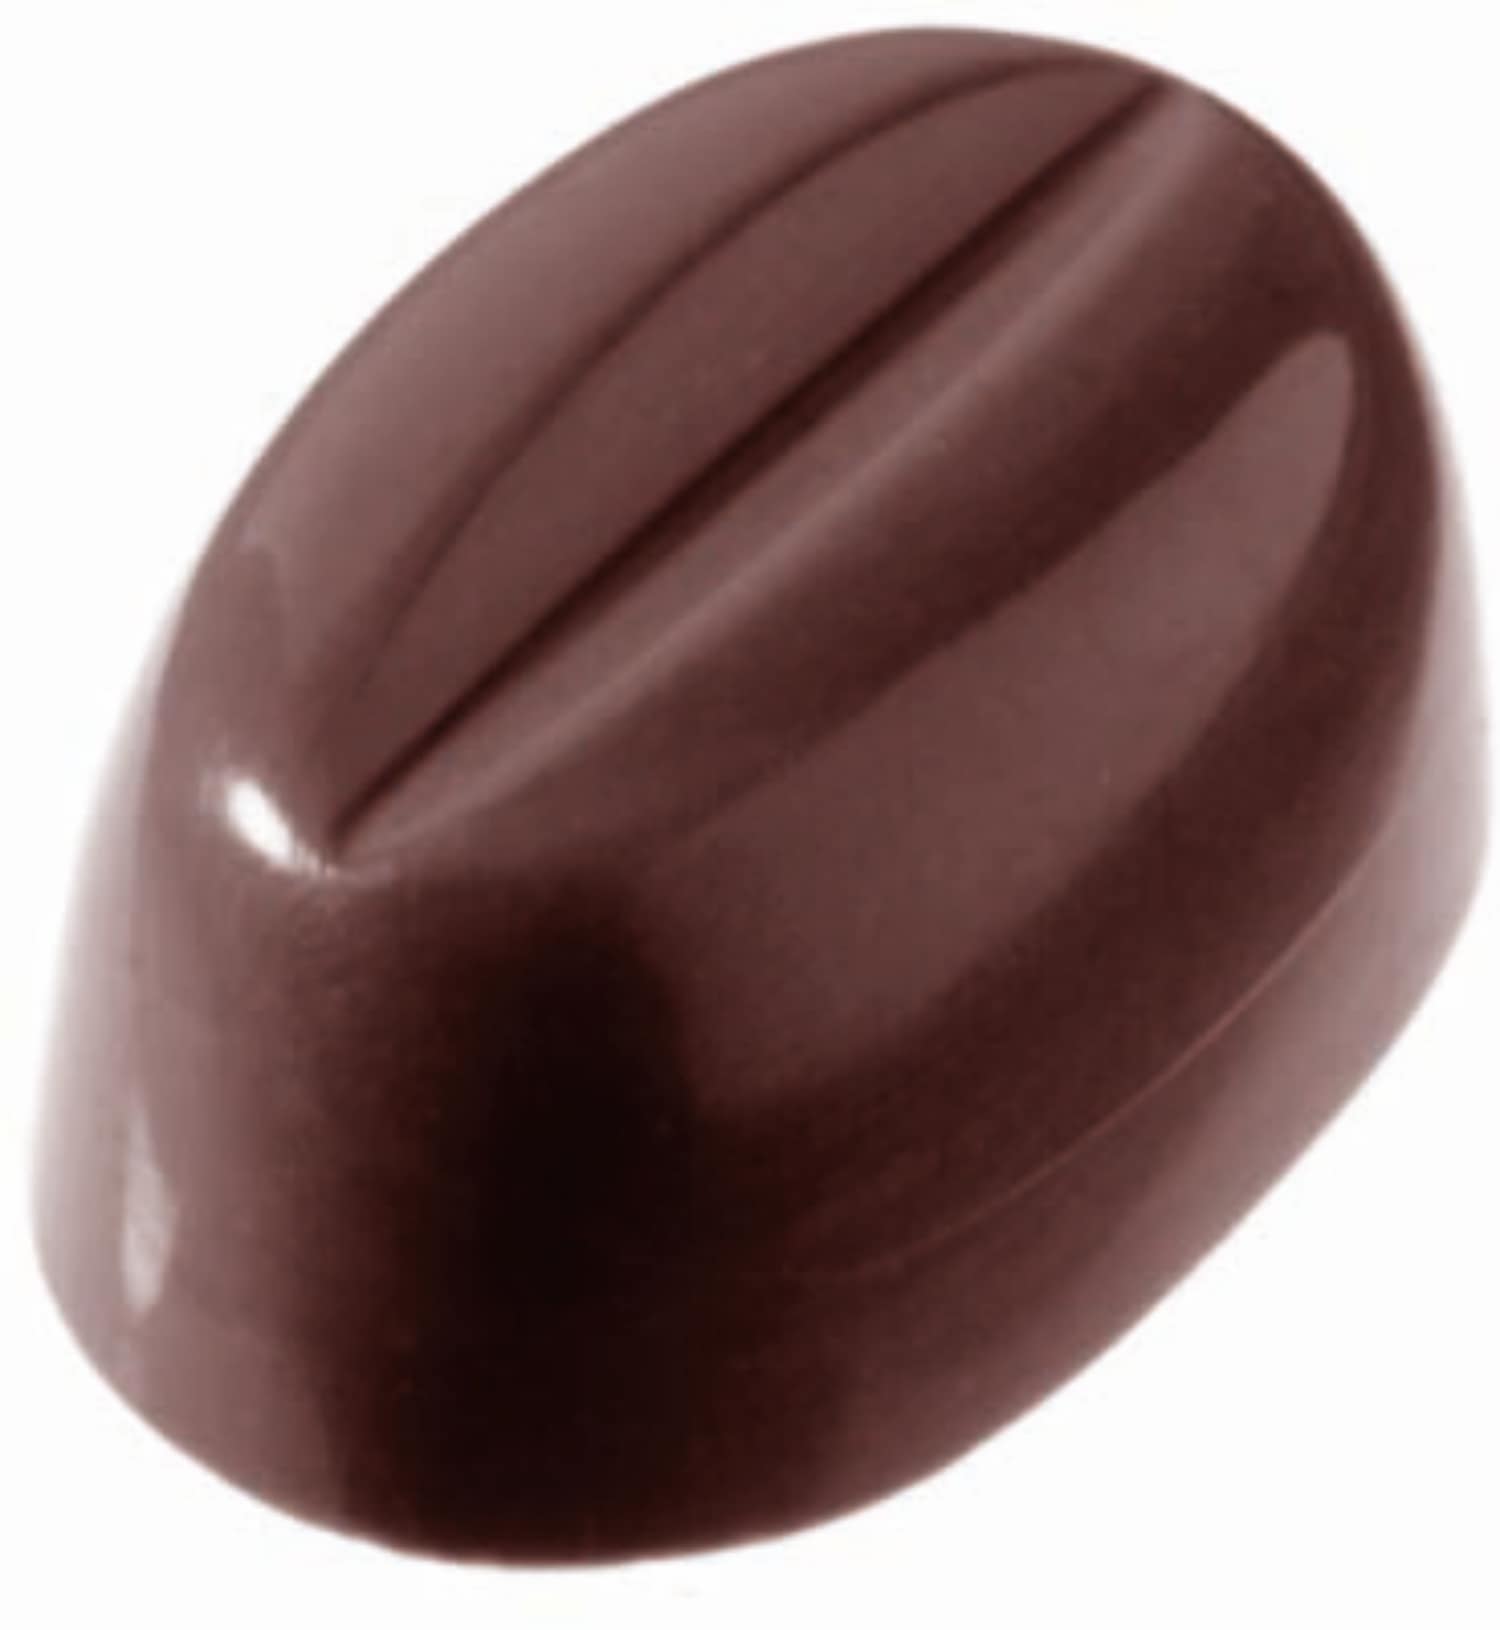 Chocolate mould "Coffee bean" 421529 421529